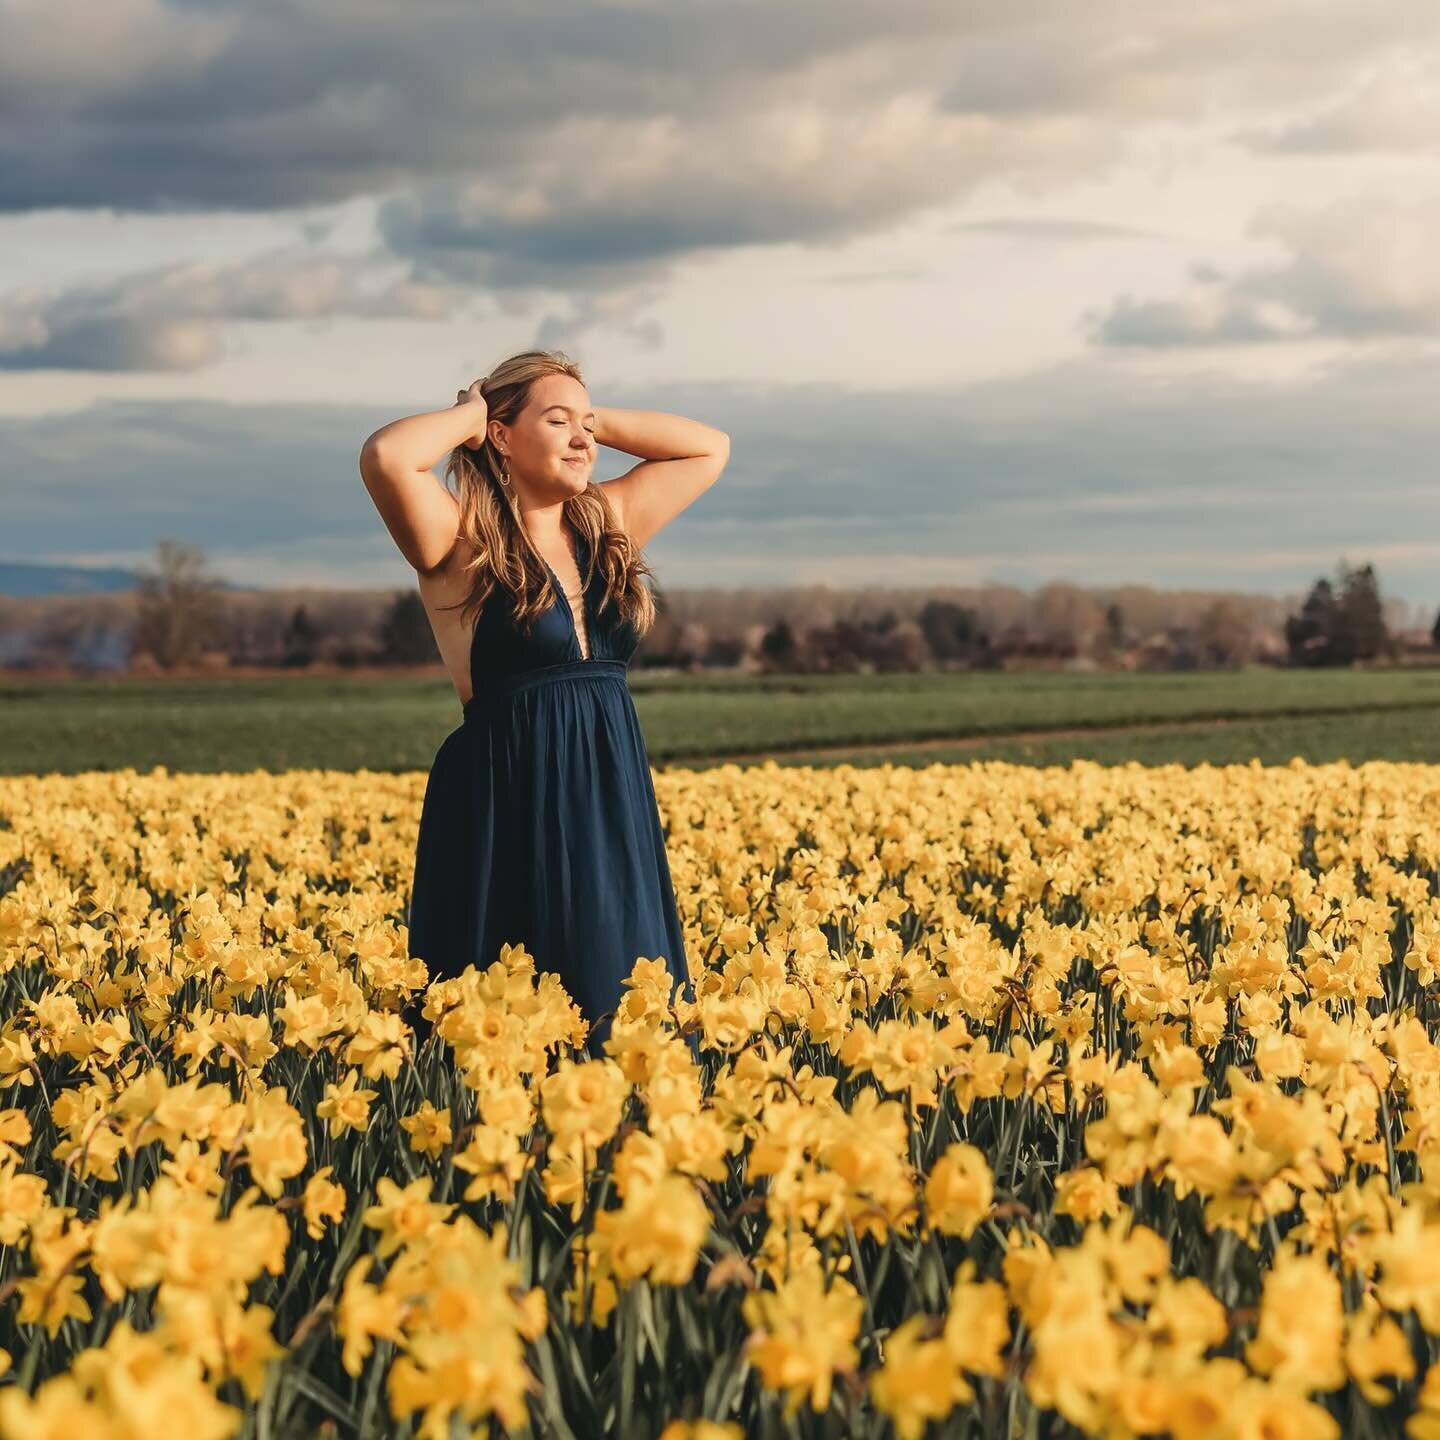 Z&ouml;e came from Florida for a quick trip to tour colleges. We had one evening, and one evening only, to make this session happen!We lucked out with a perfectly timed parting of the clouds for her senior photos in the daffodils! Phew! It had been r